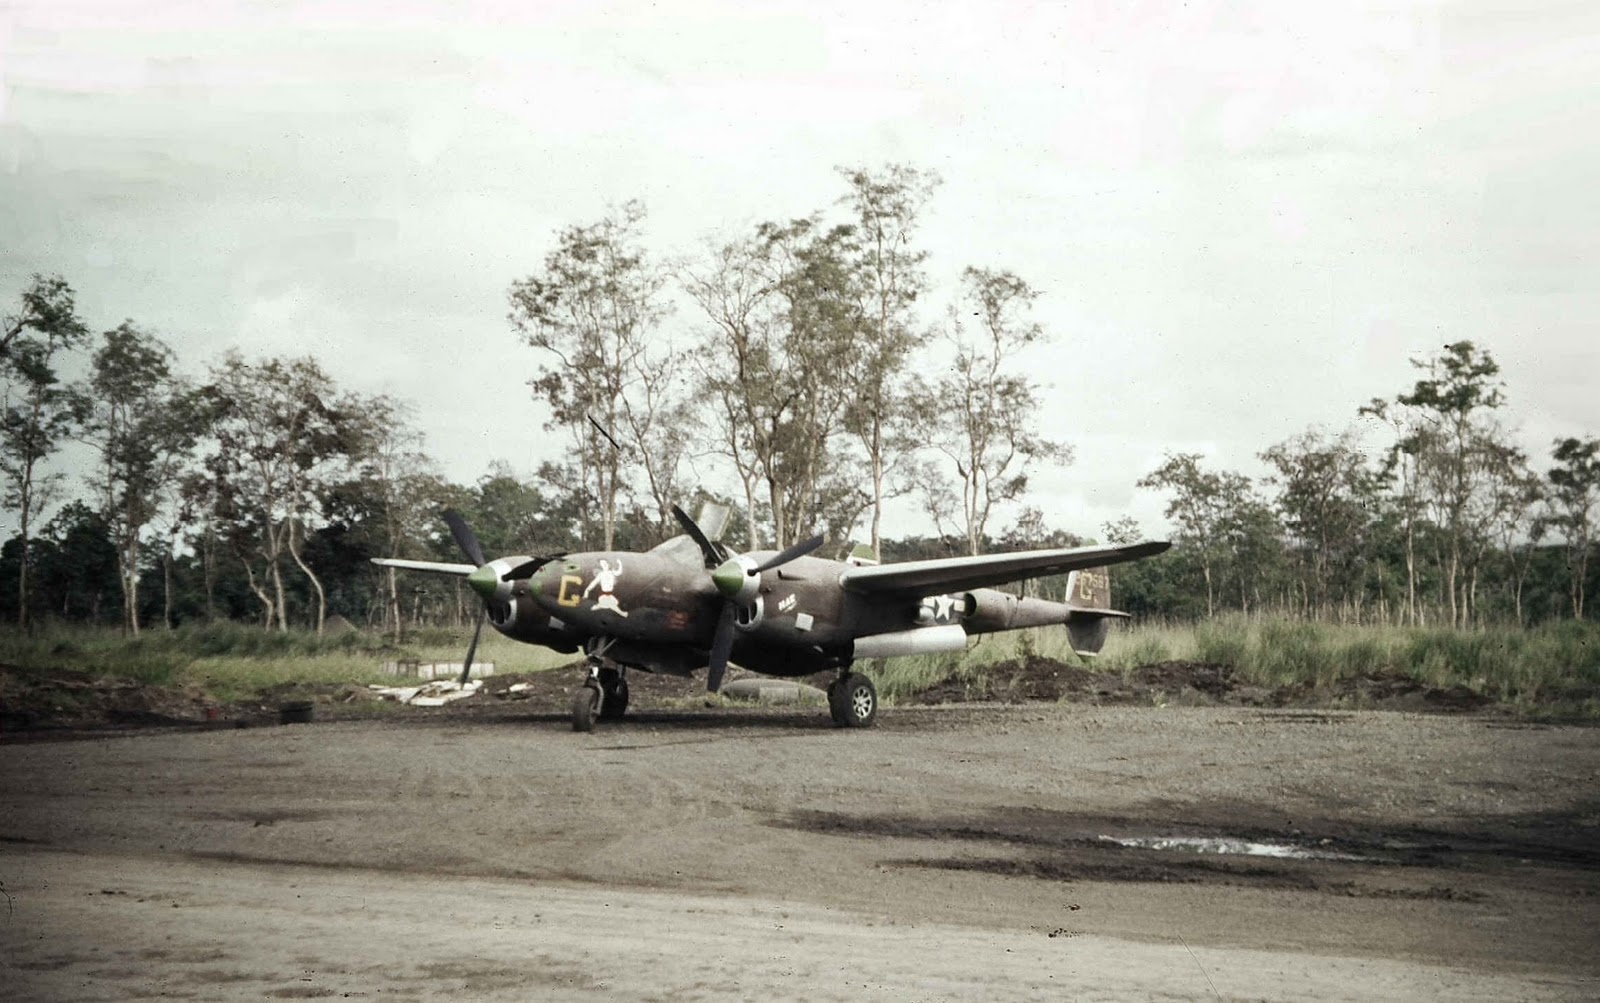 P-38J Lightning assigned to Howard Fotheringham of the 80th Fighter Squadron on the pad at Nadzab Airstrip near Lae, New Guinea, May 1944